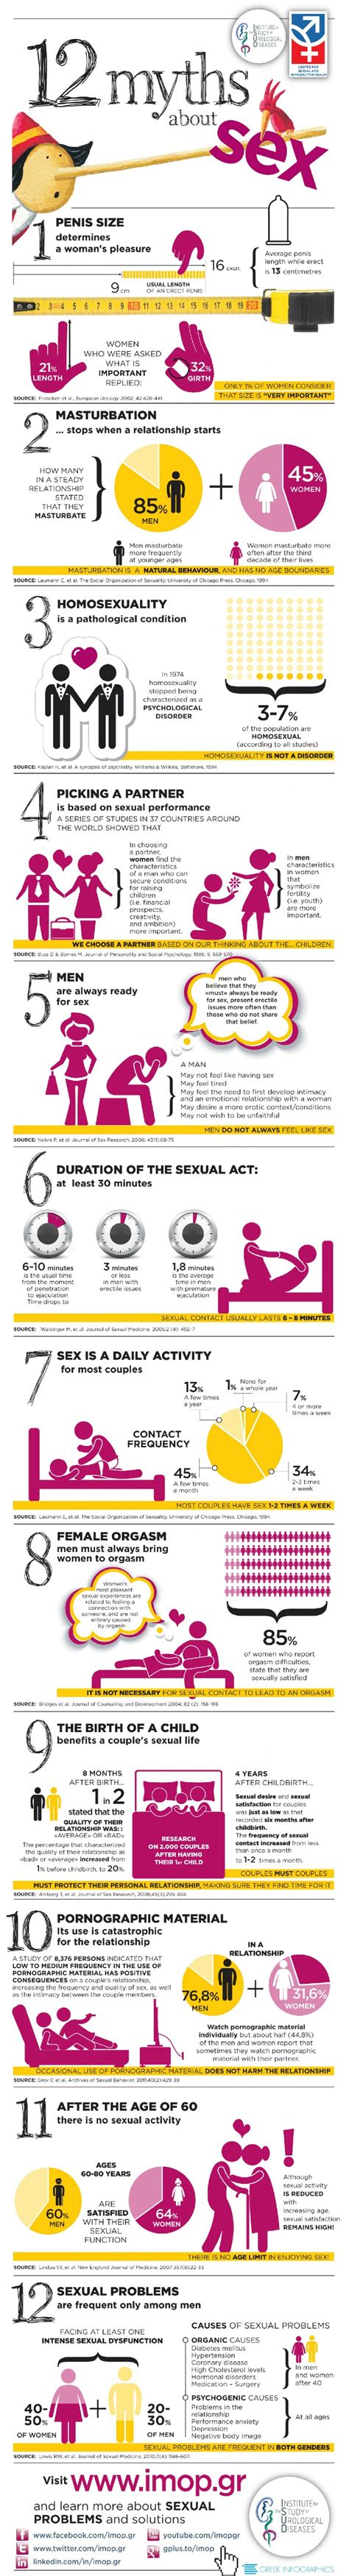 12 Of The Most Common Sex Myths Debunked [infographic] The Trent